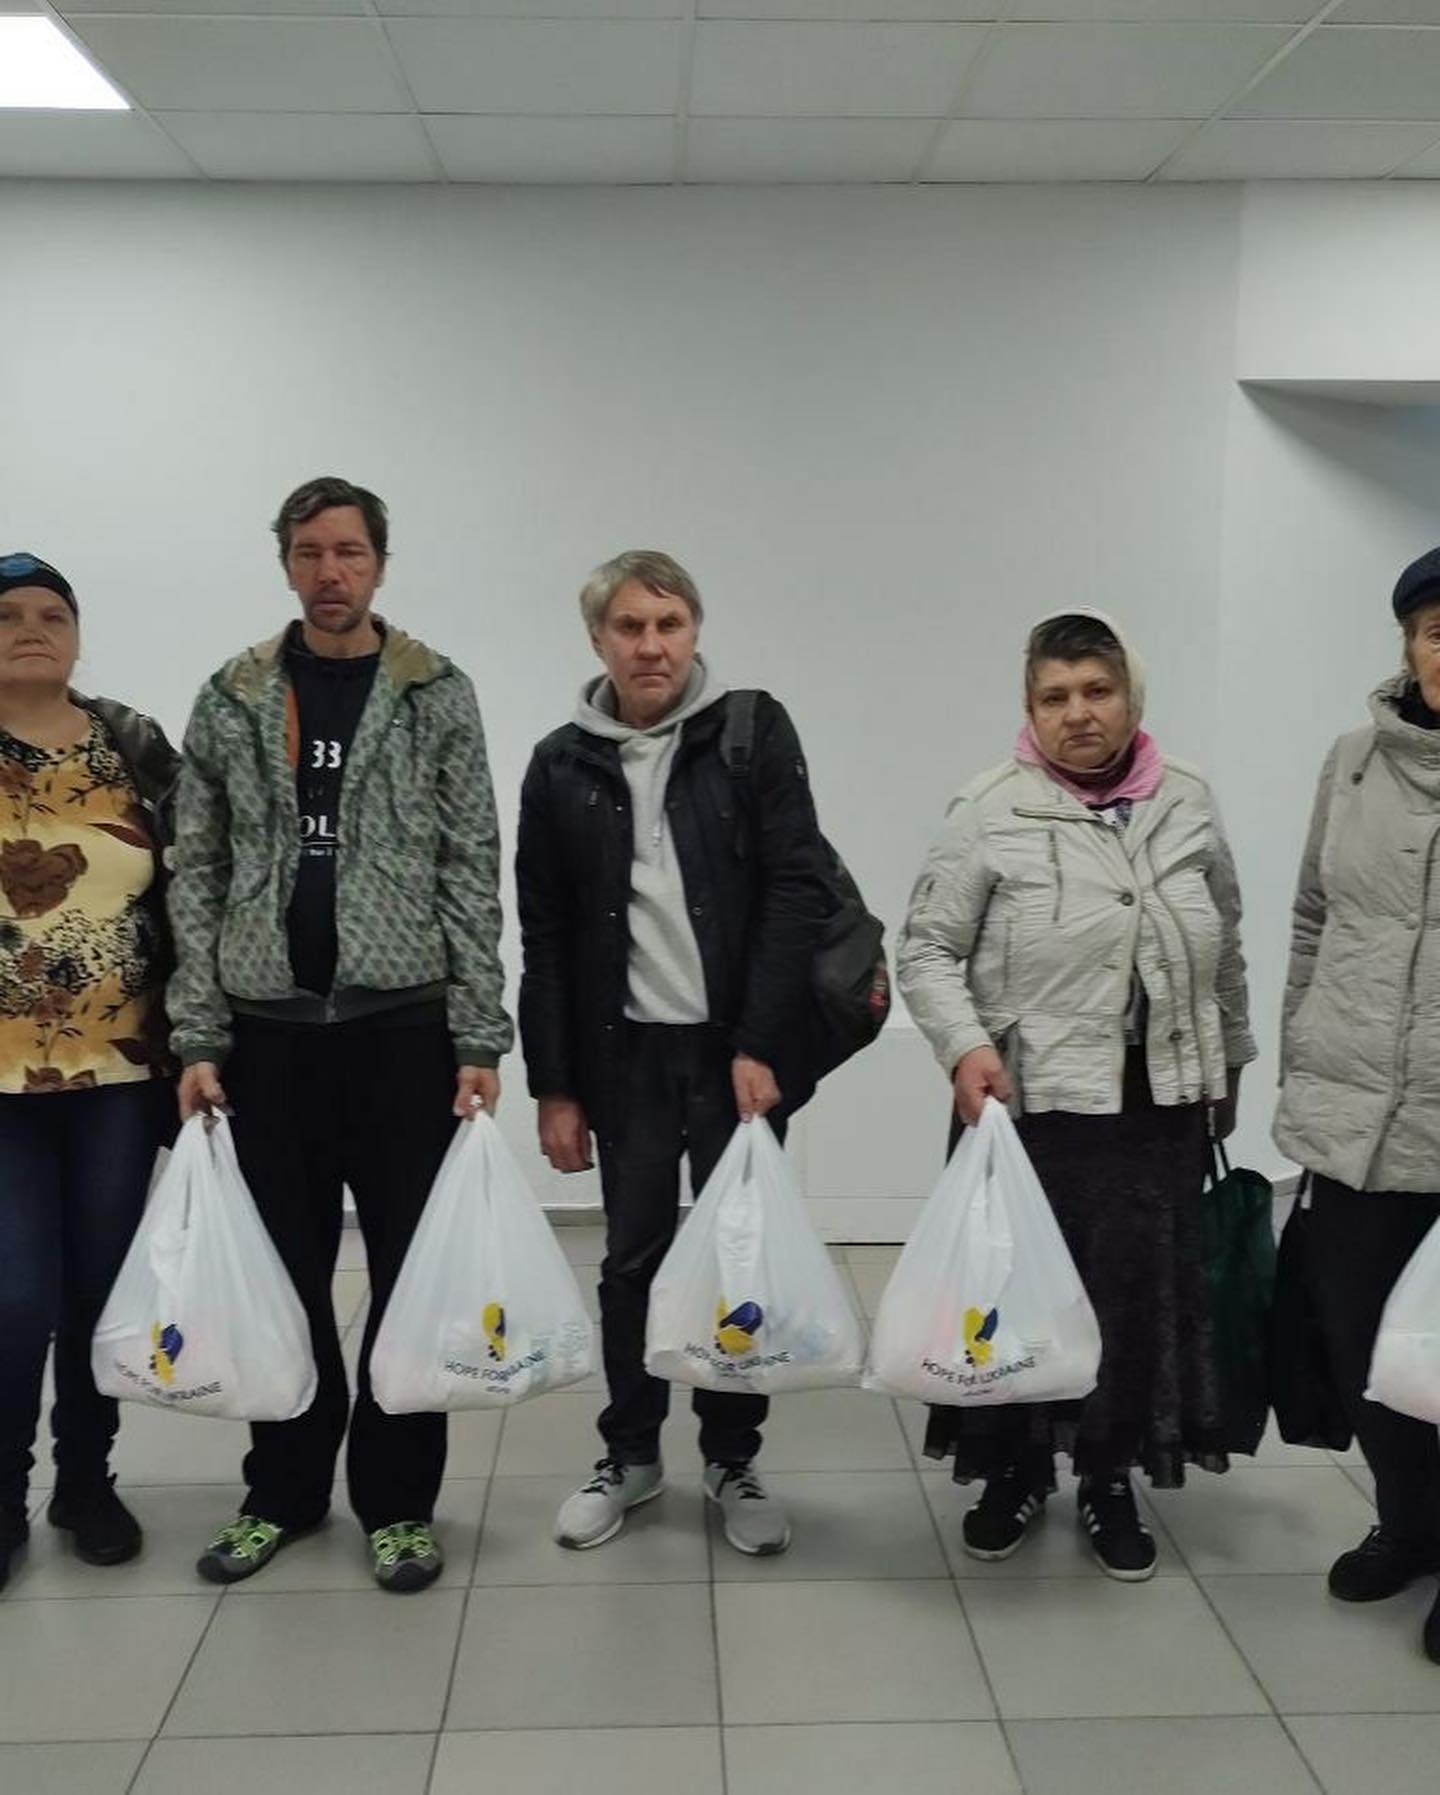 A group of people posing for a photo with shopping bags.